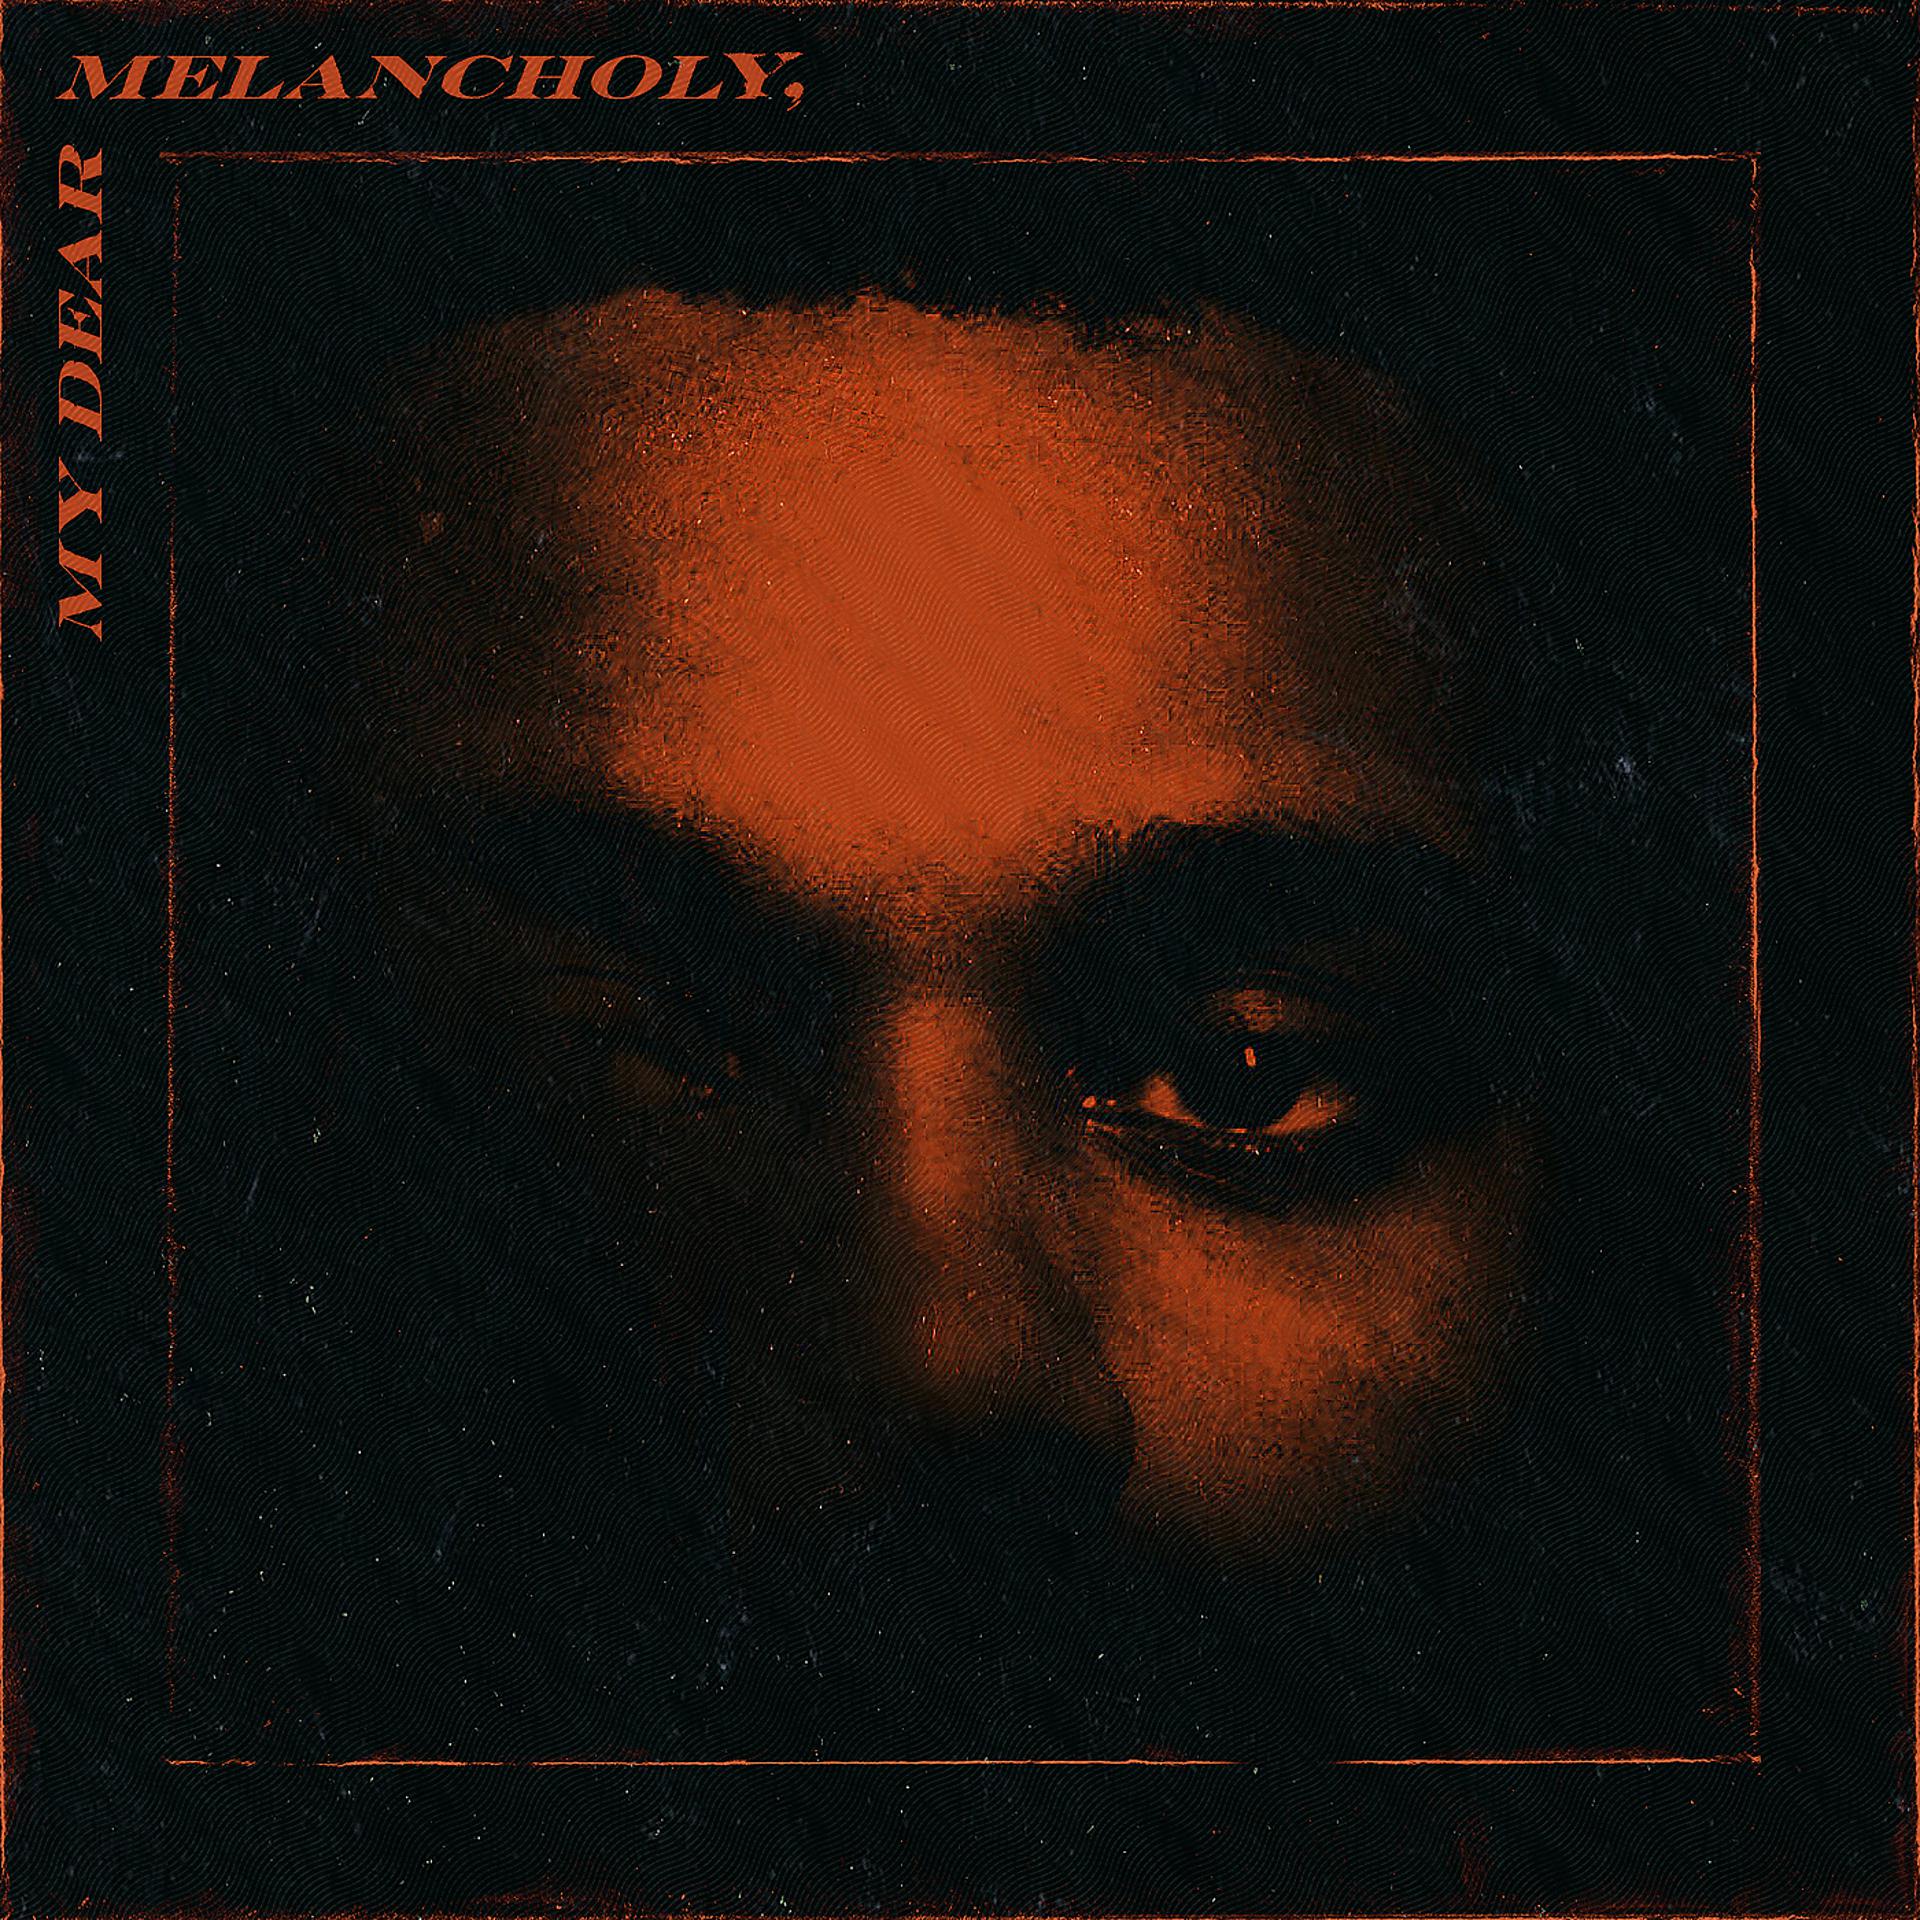 The weekend out my name. The Weeknd my Dear Melancholy. The Weeknd my Dear Melancholy обложка. The Weeknd обложка альбома. The Weeknd my Dear Melancholy album Cover.